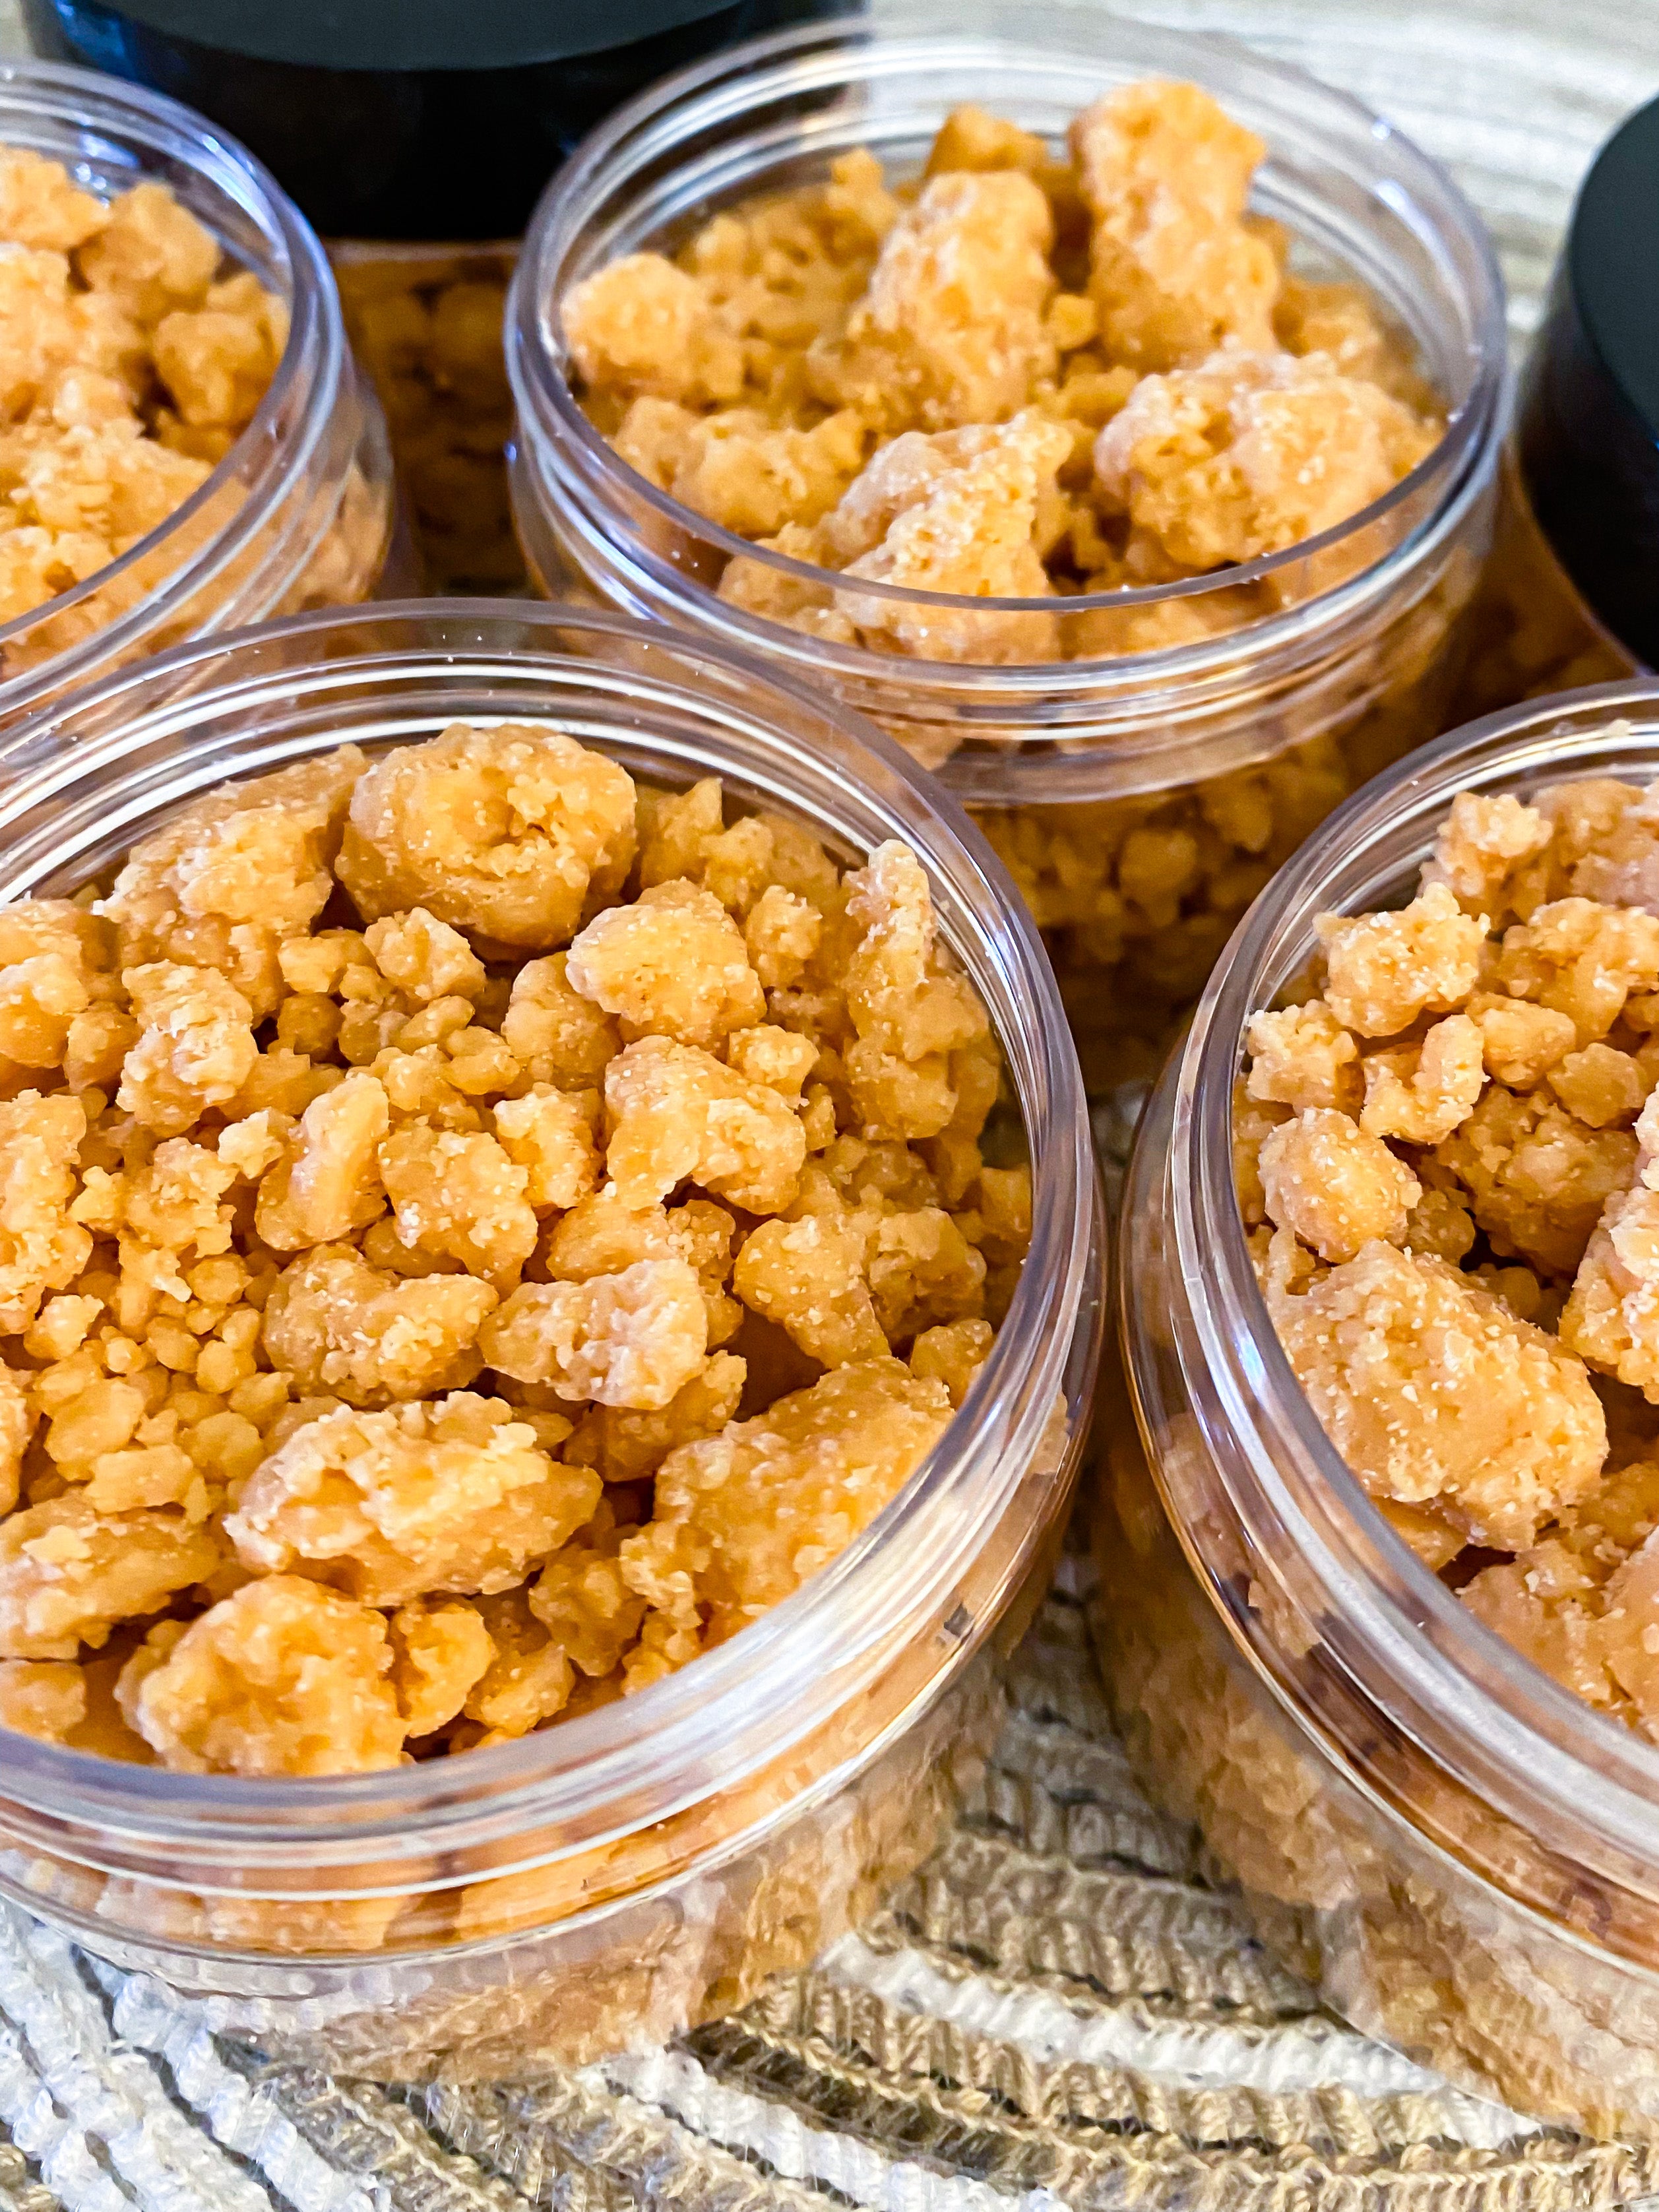 Peanut Butter Scented Wax Cubes